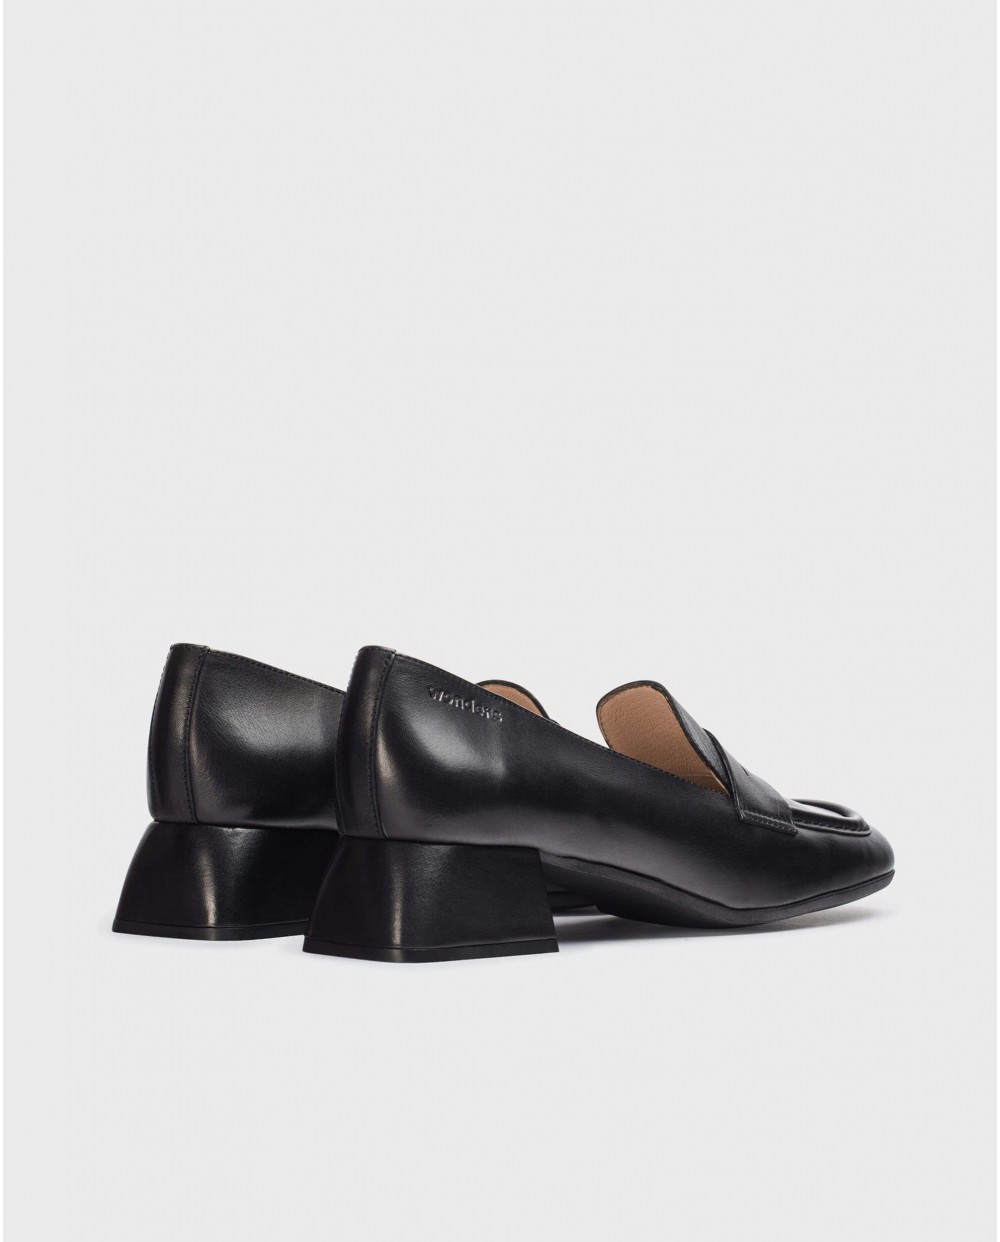 Wonders-Loafers-Black Gift moccasin